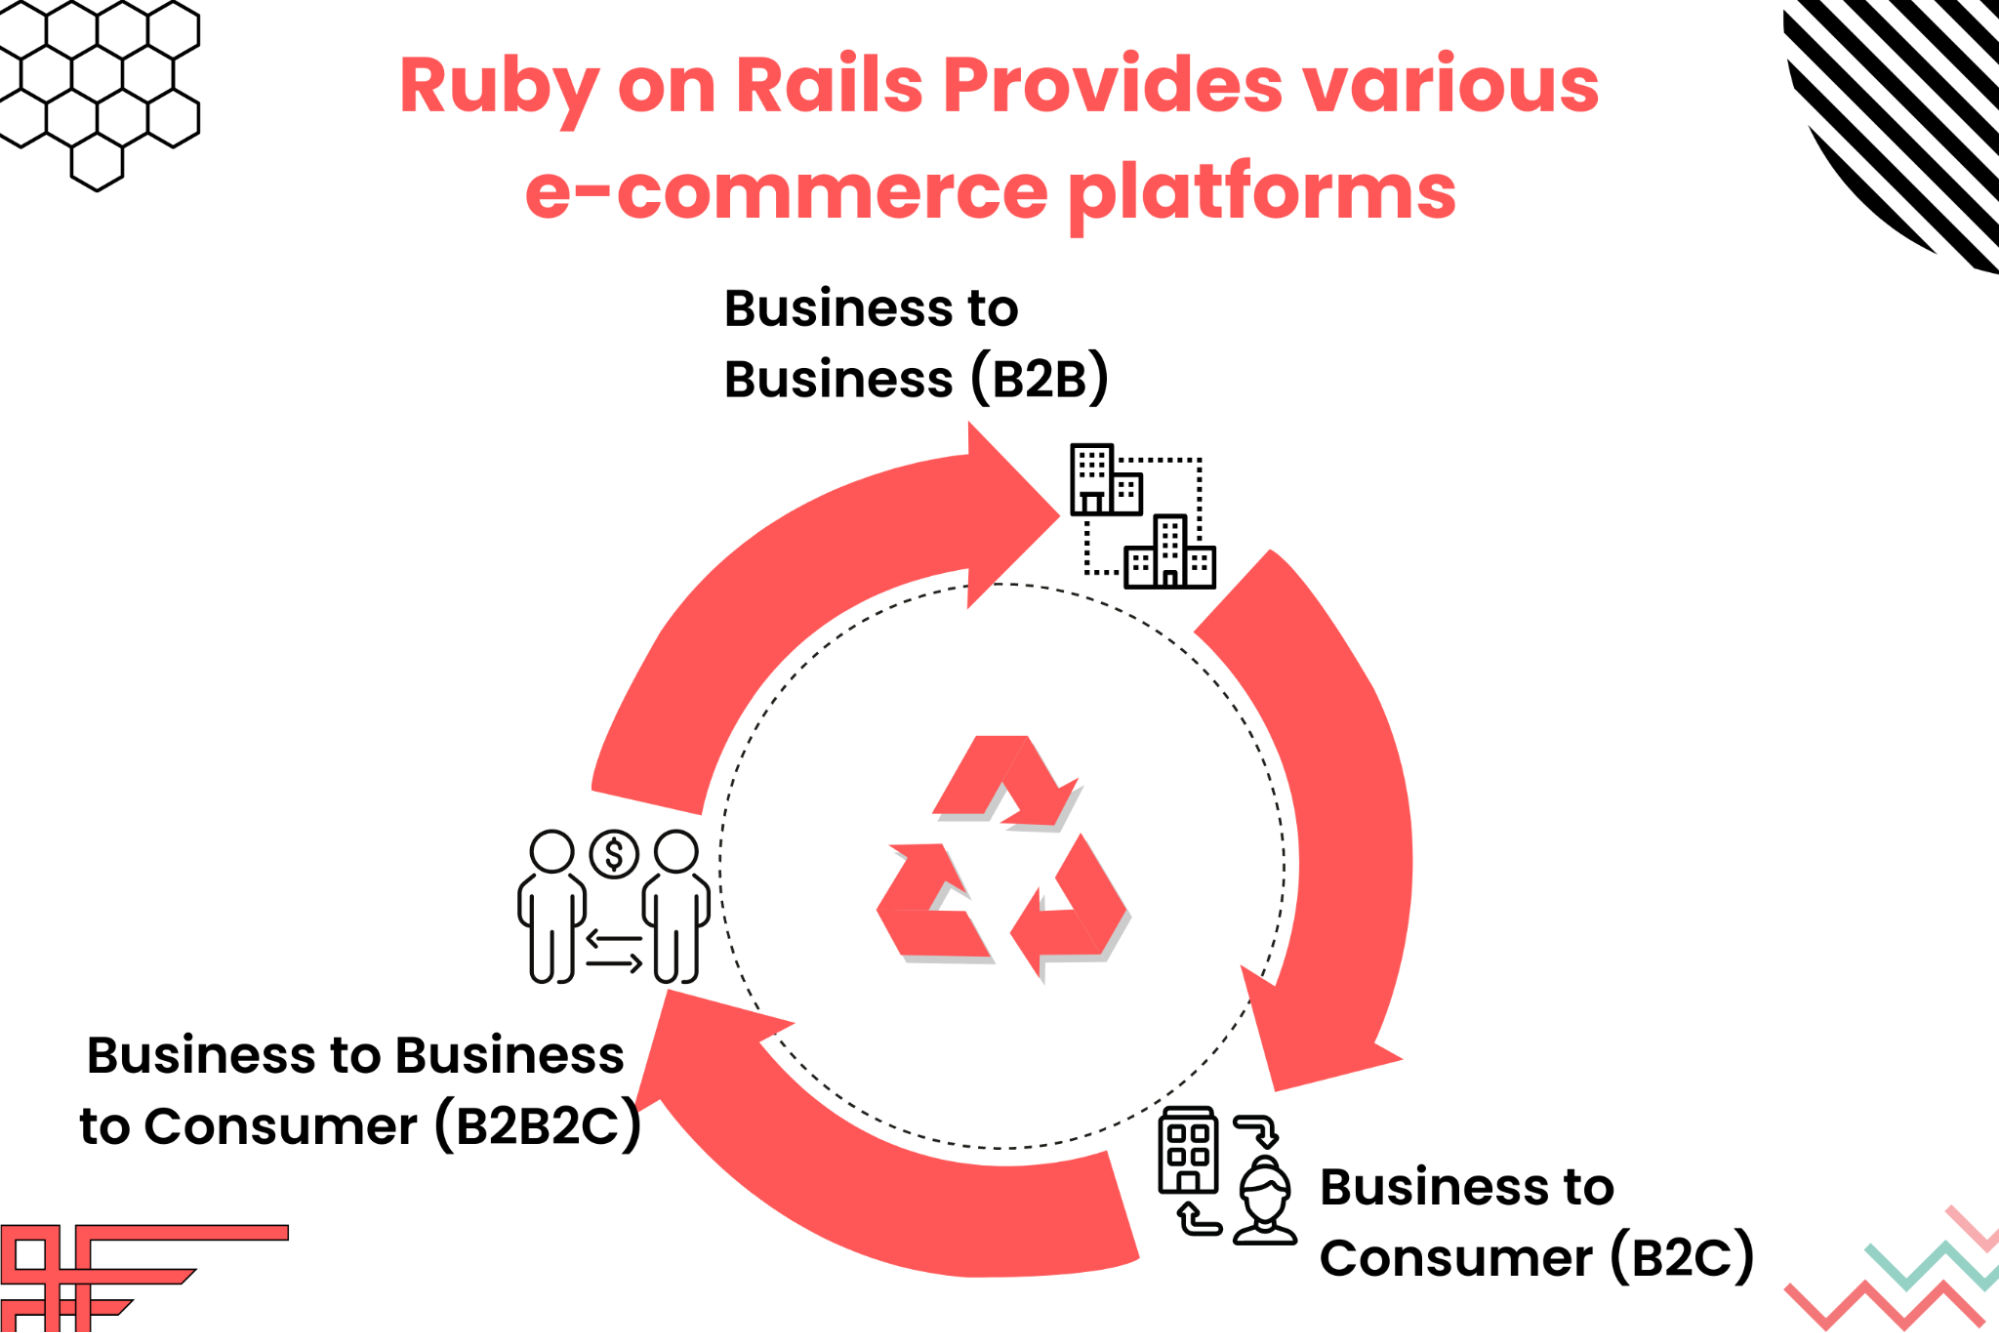 Ruby on Rails offers various e-commerce platforms